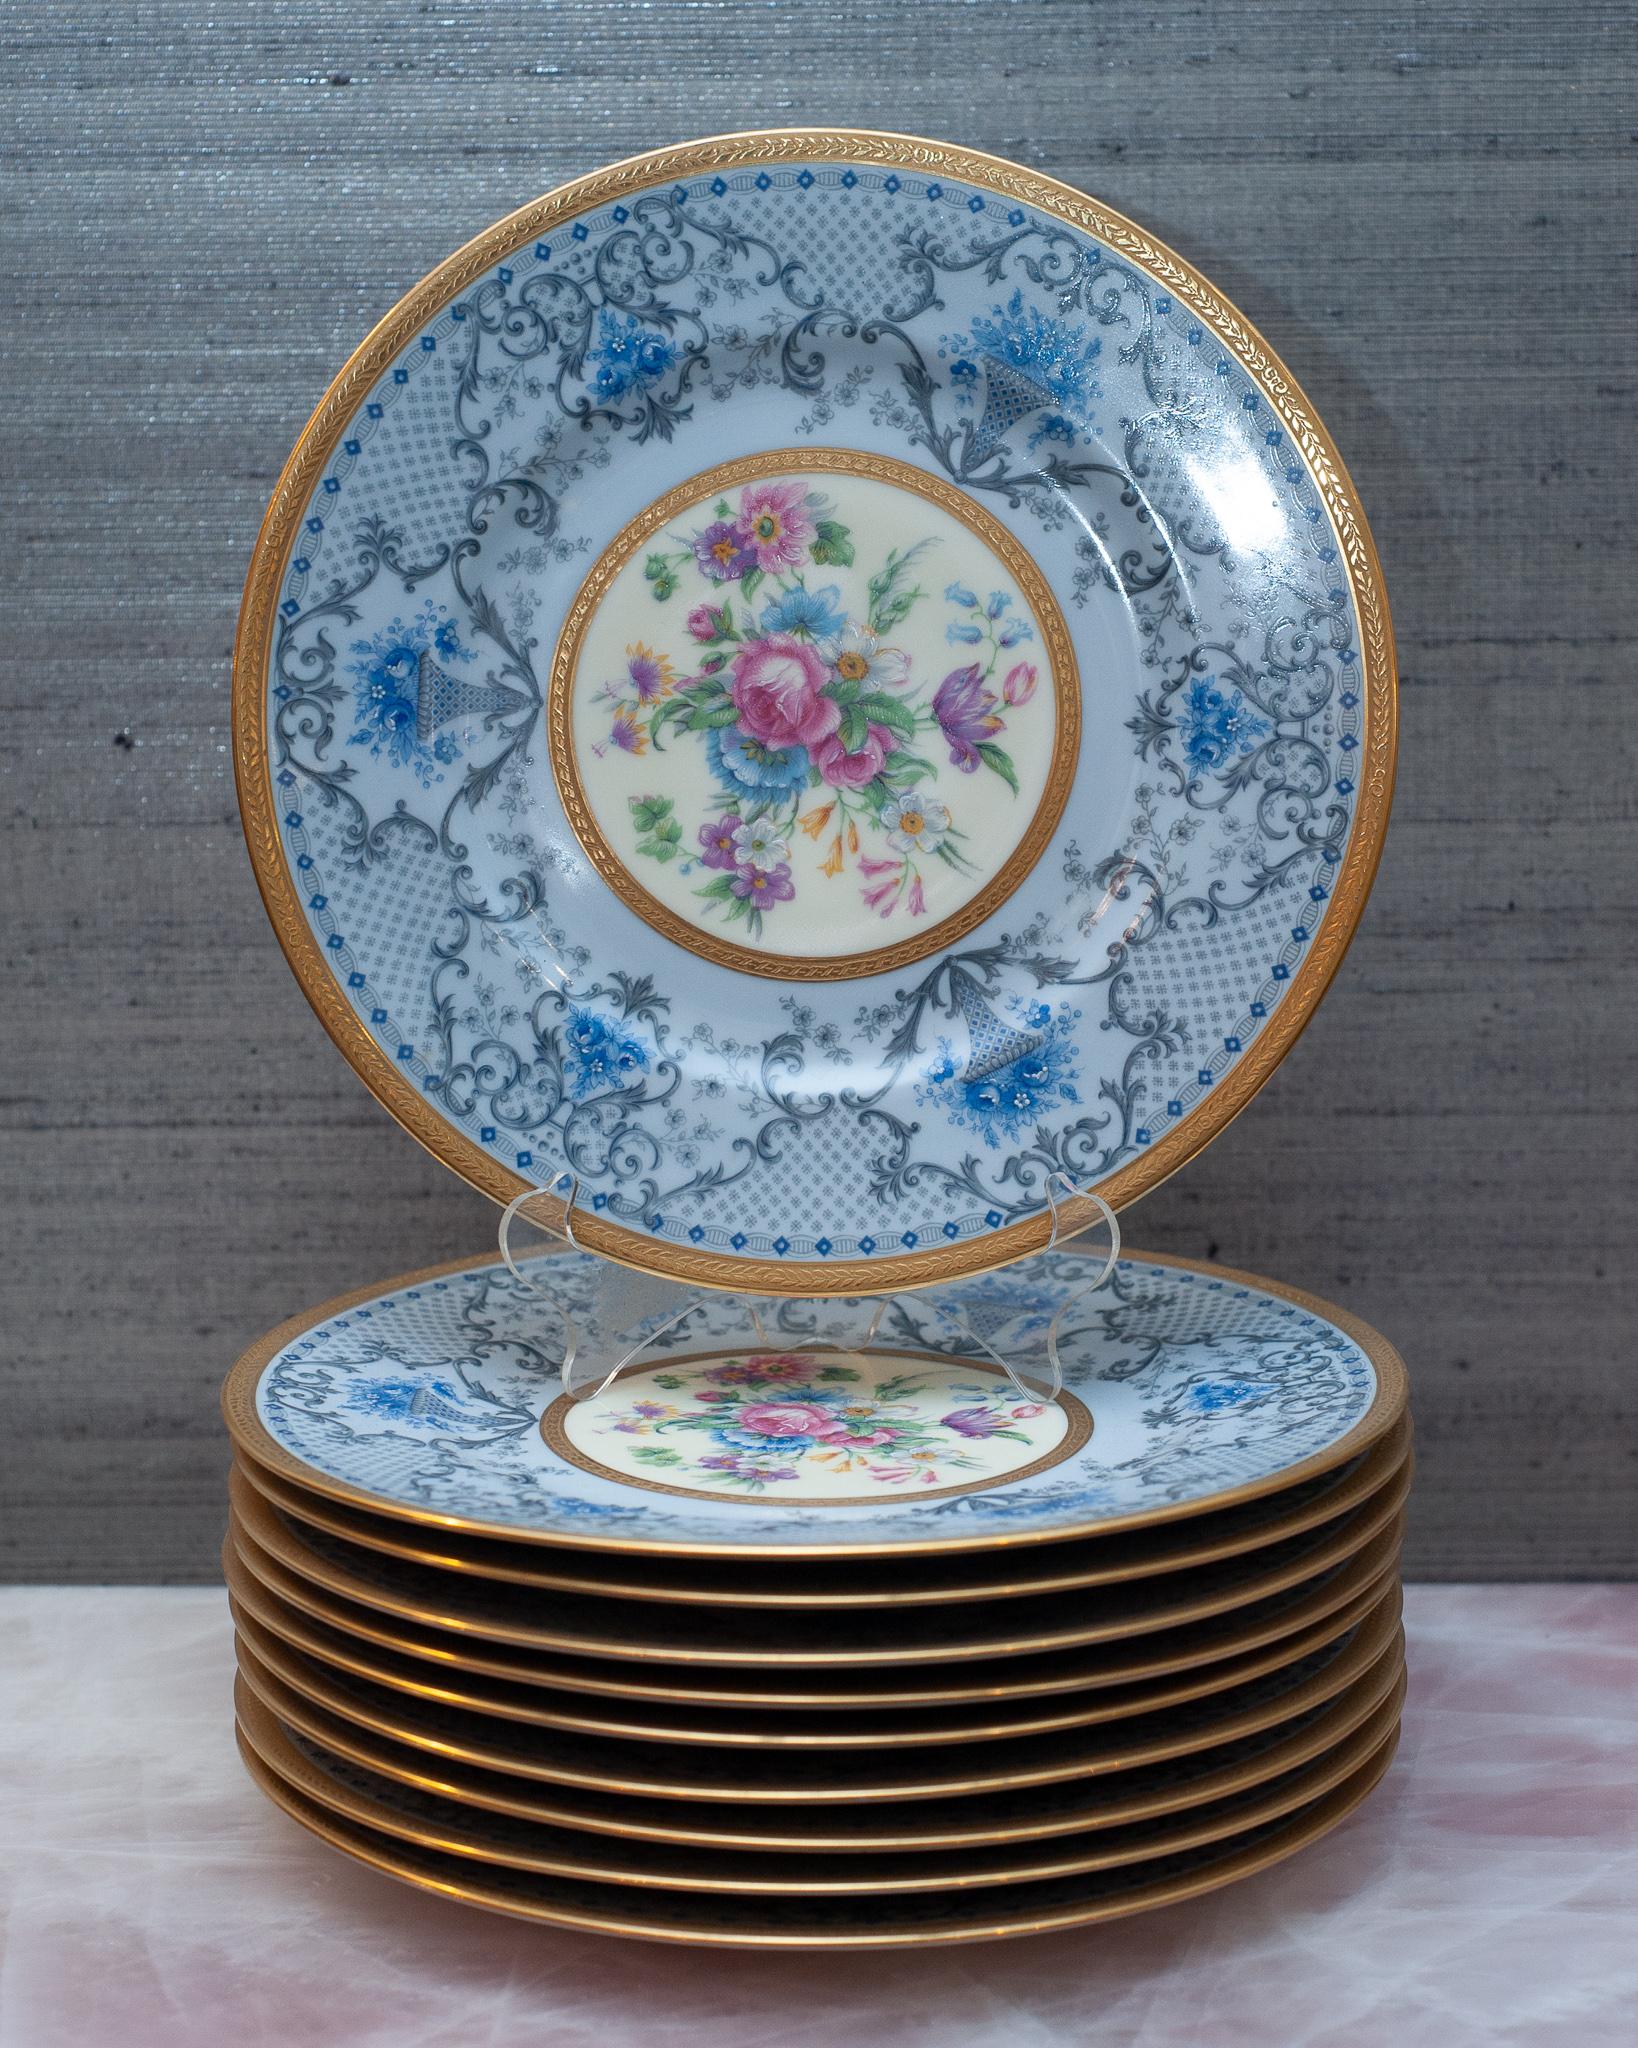 A gorgeous set of 10 antique Limgoes blue floral and gilt dinner plates made for J.E. Caldwell.